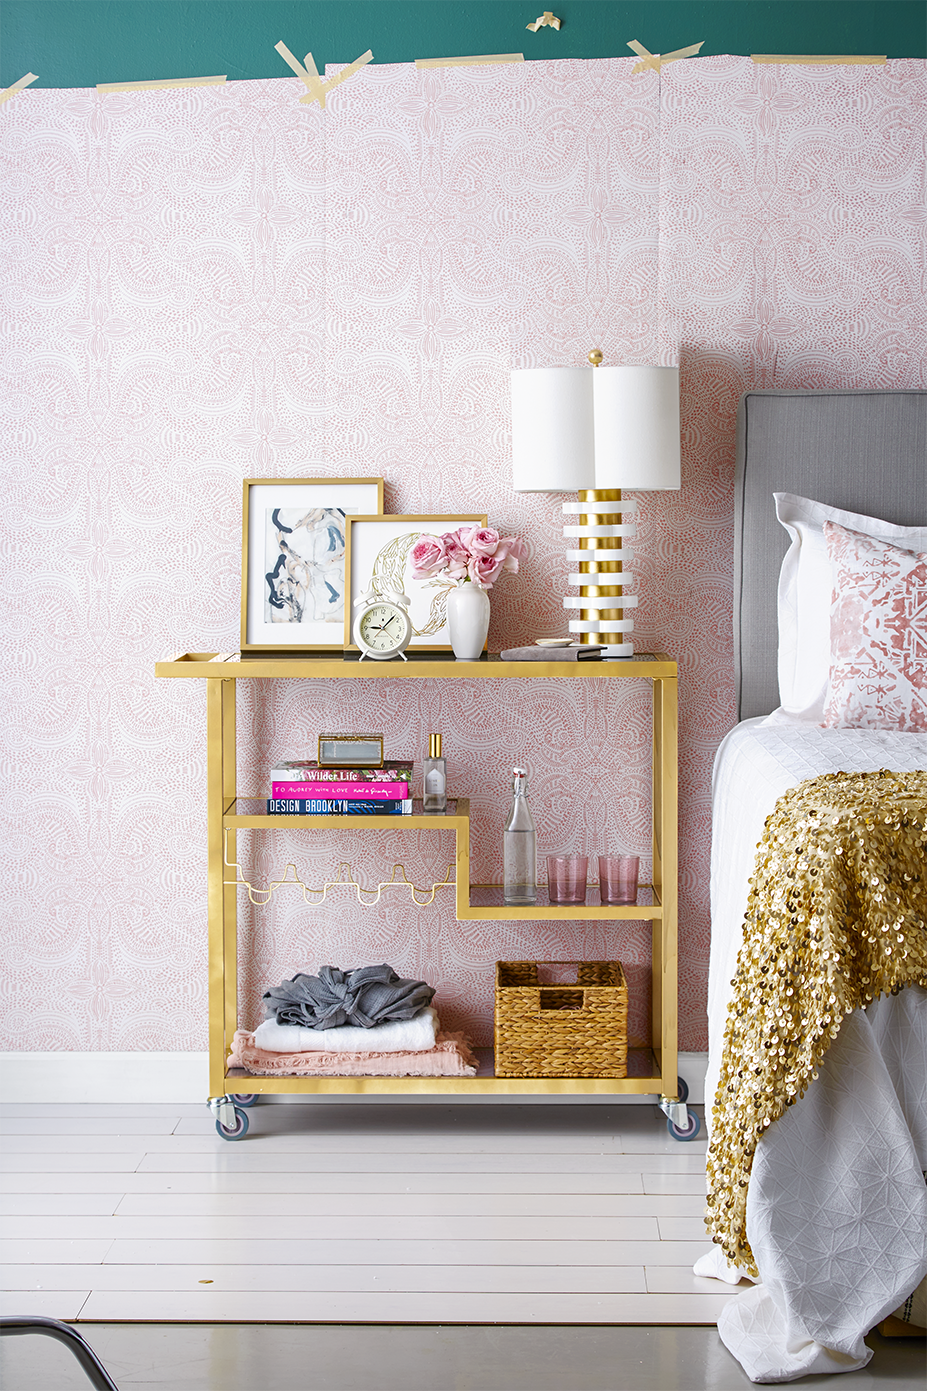 Ideas For Teen Girls Rooms